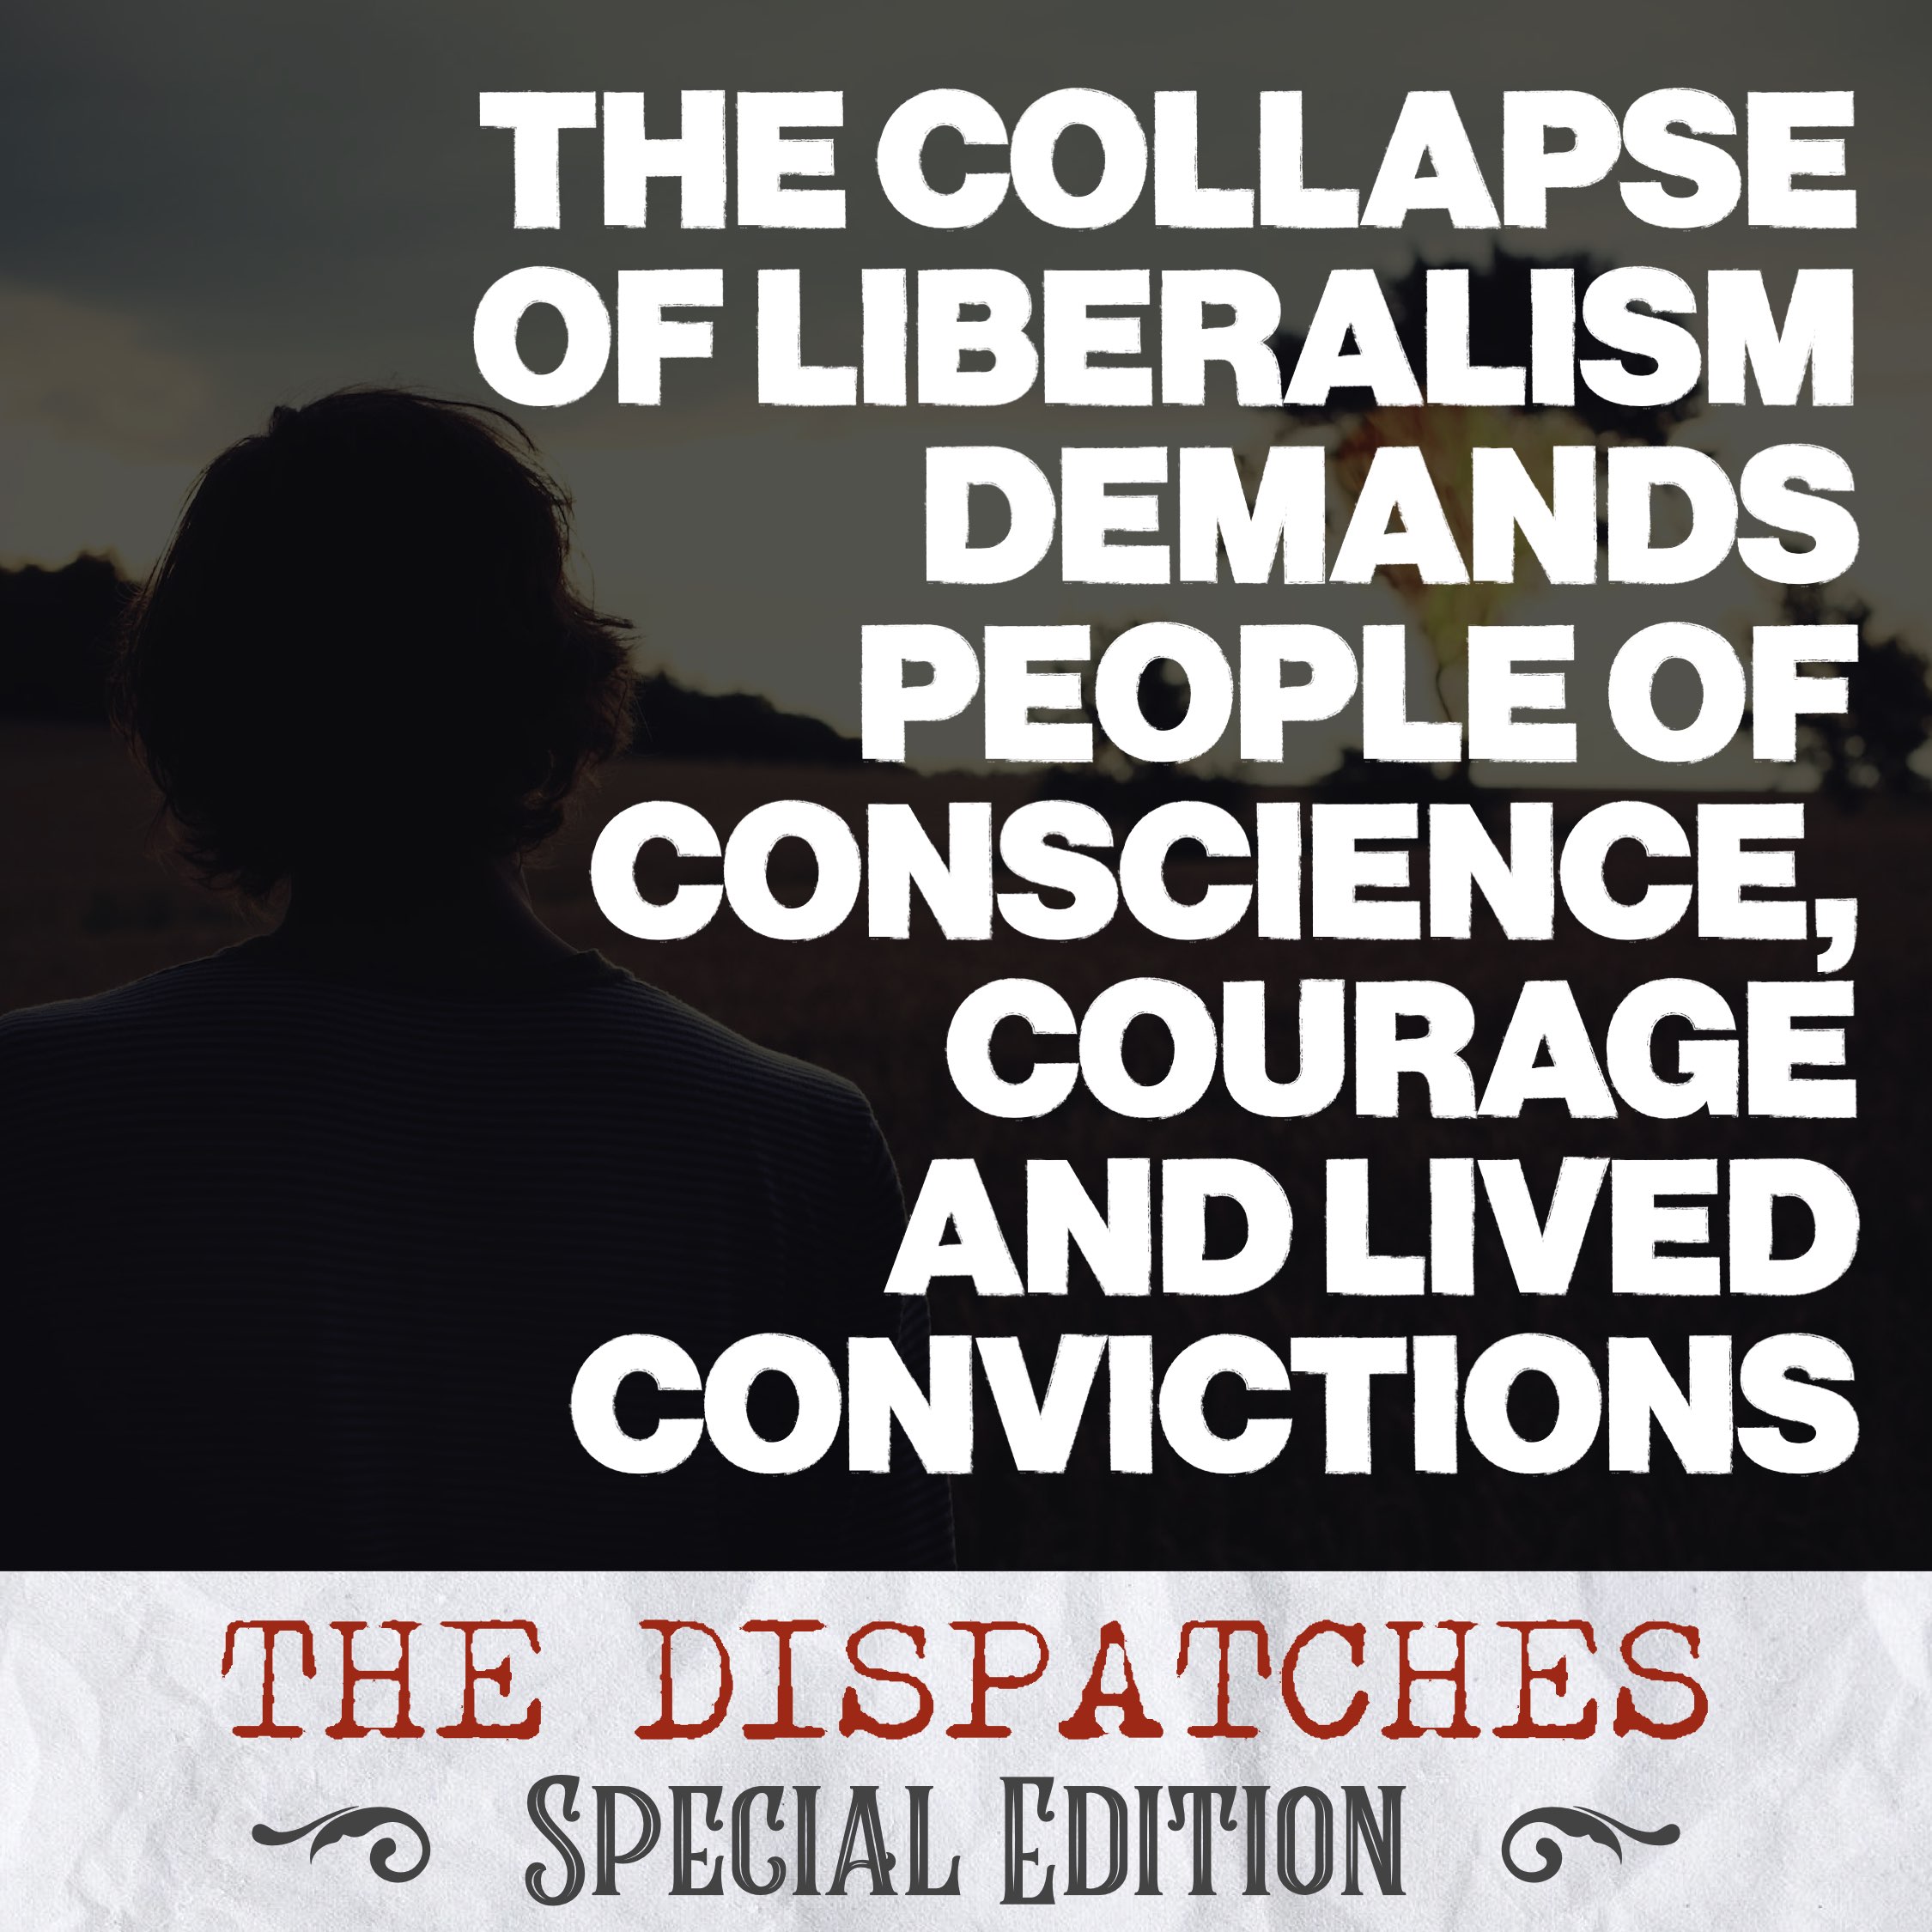 The Collapse of Liberalism Demands People of Conscience, Courage, and Lived Convictions